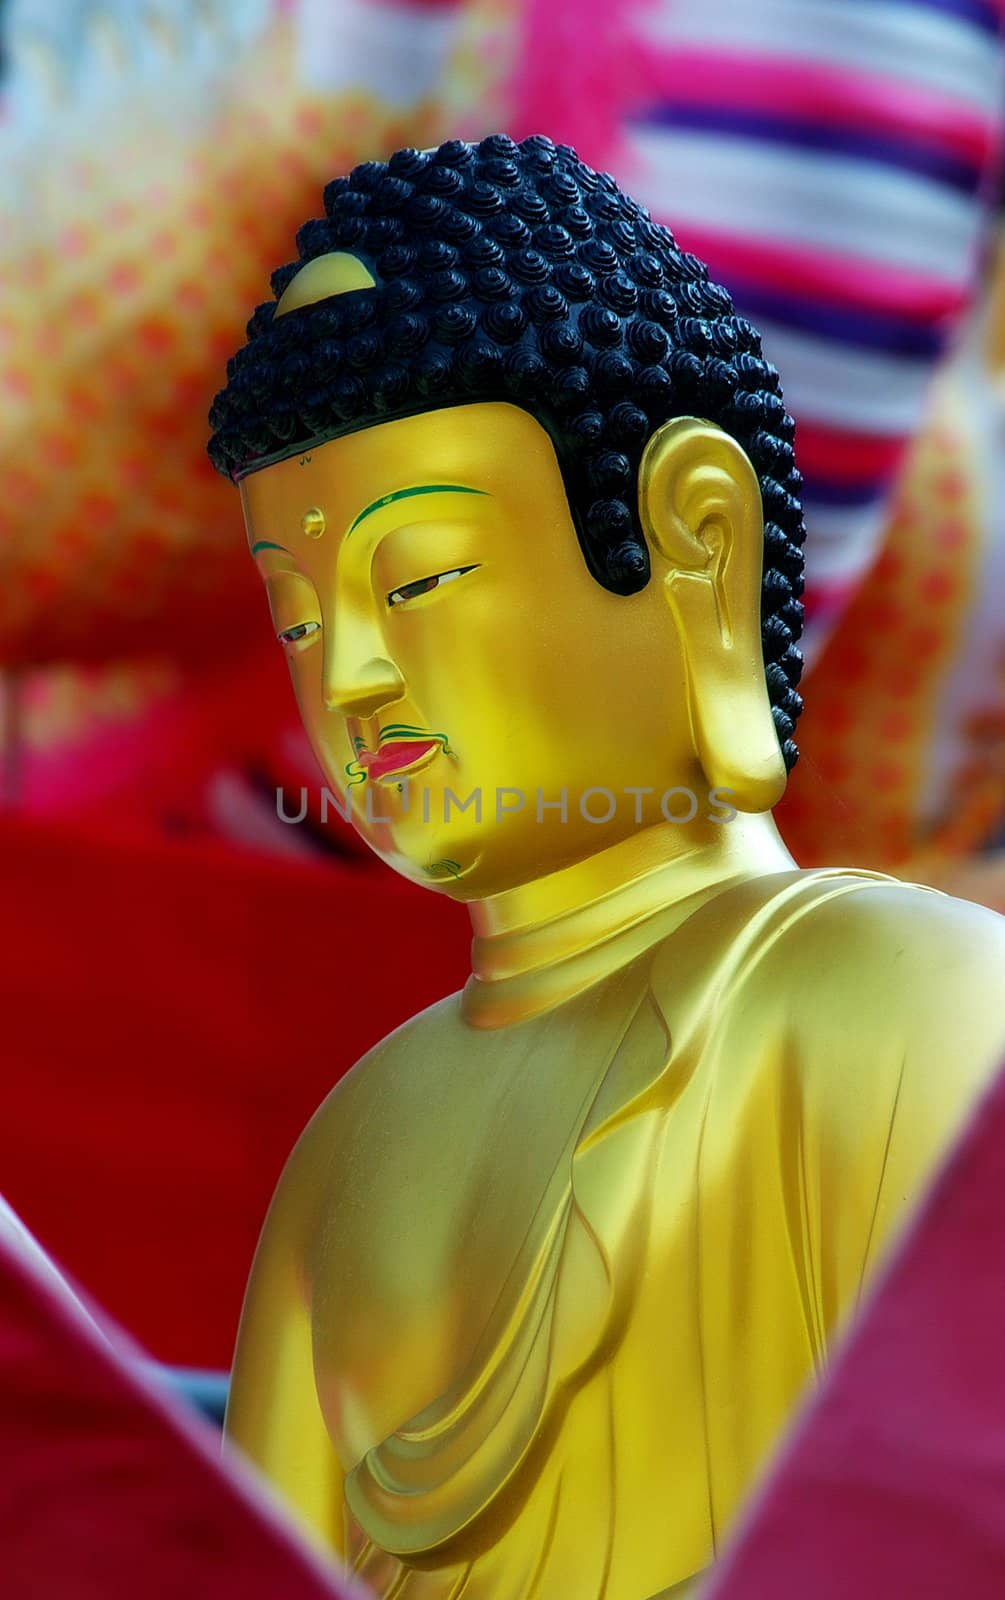 A golden buddha sitting against a colorful background. Busan, South Korea.